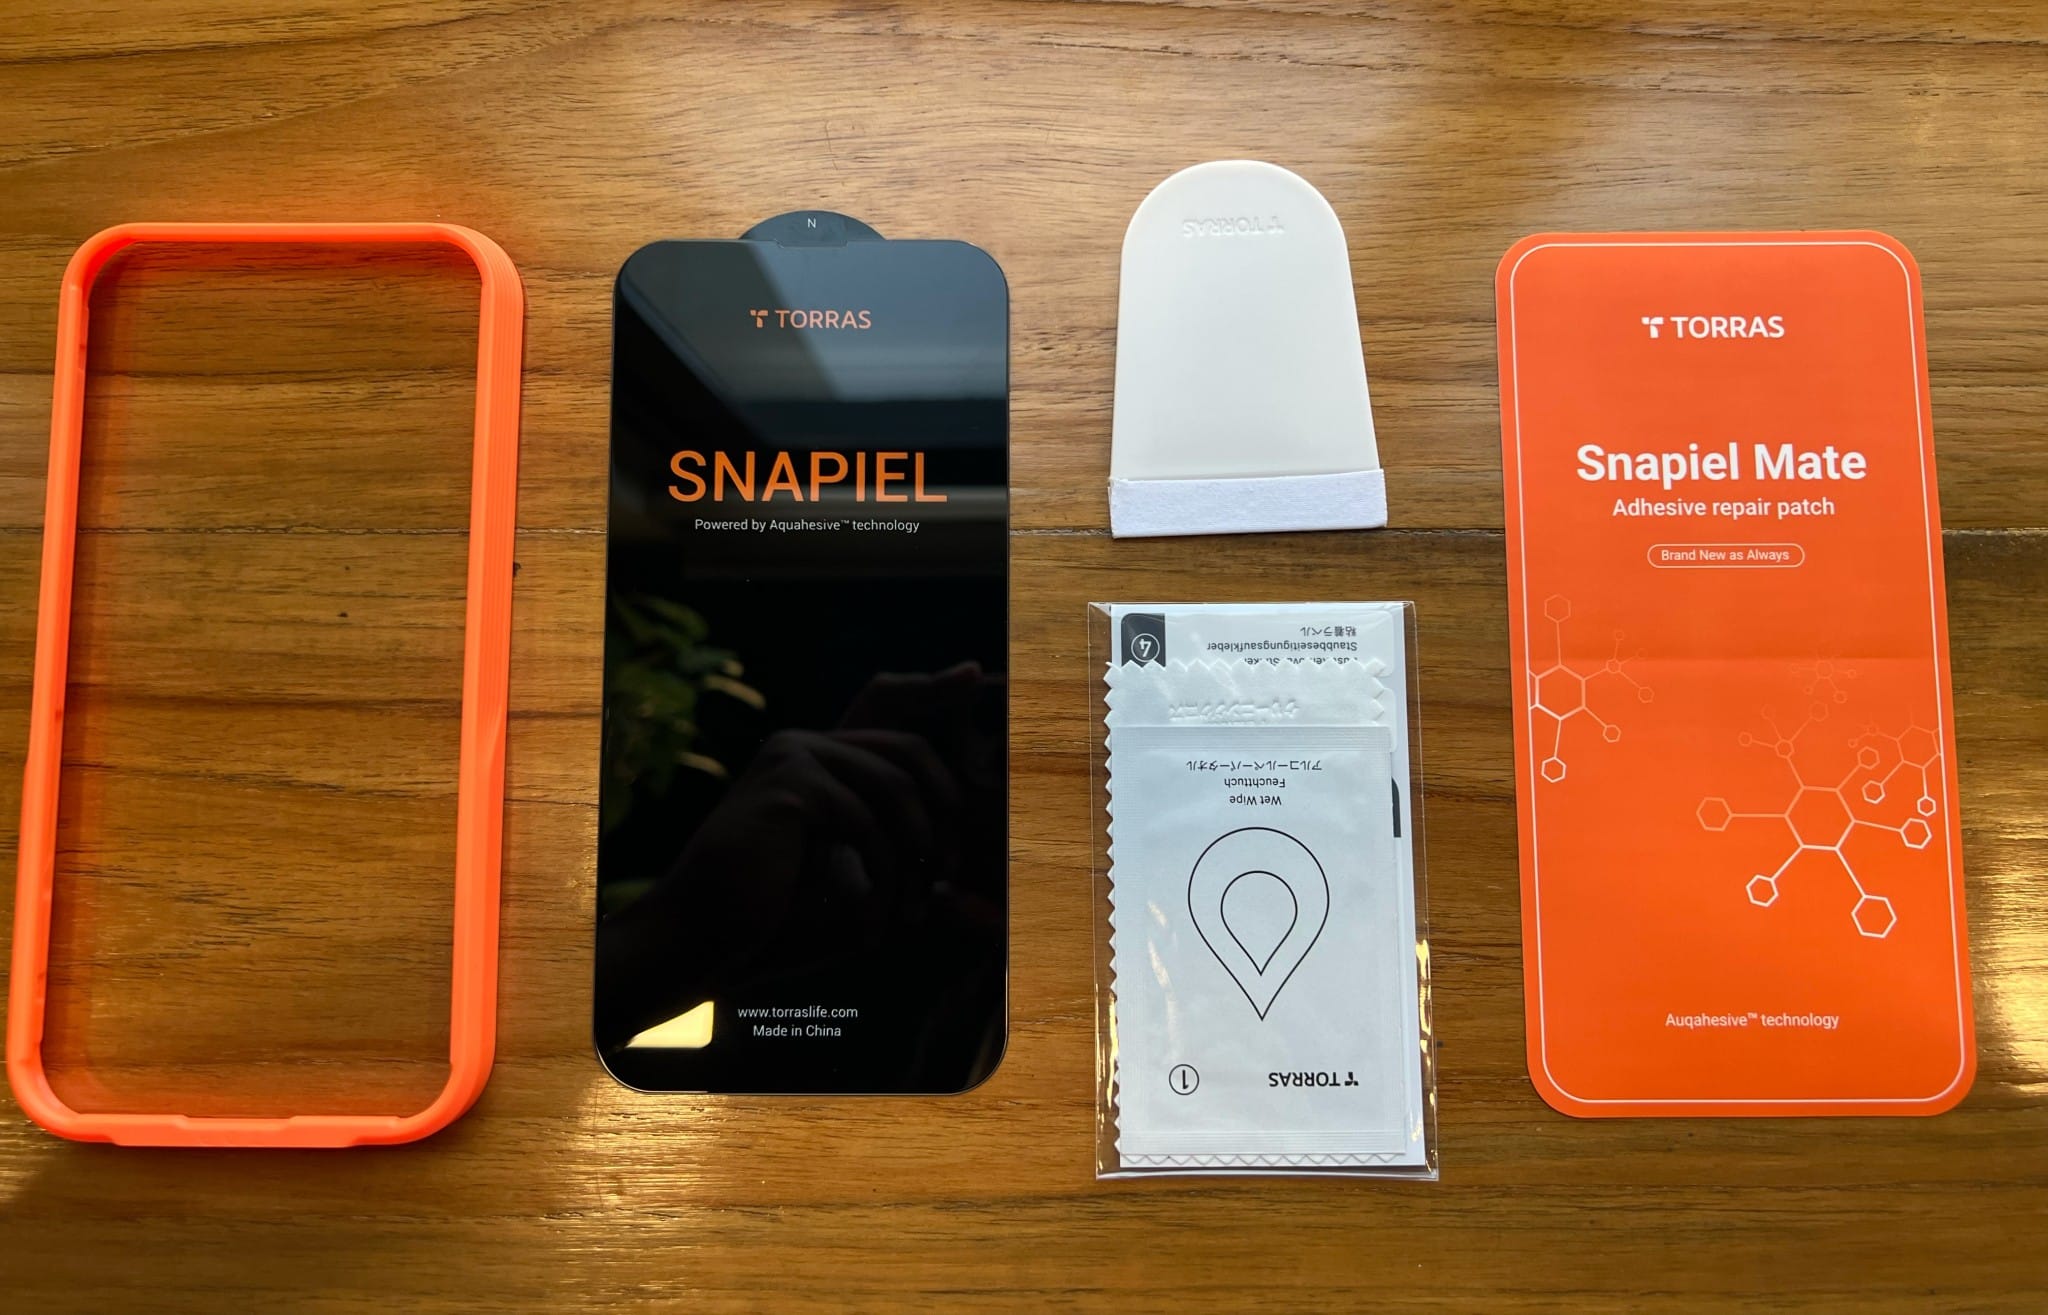 Unboxing experience of the Snapiel TORRAS